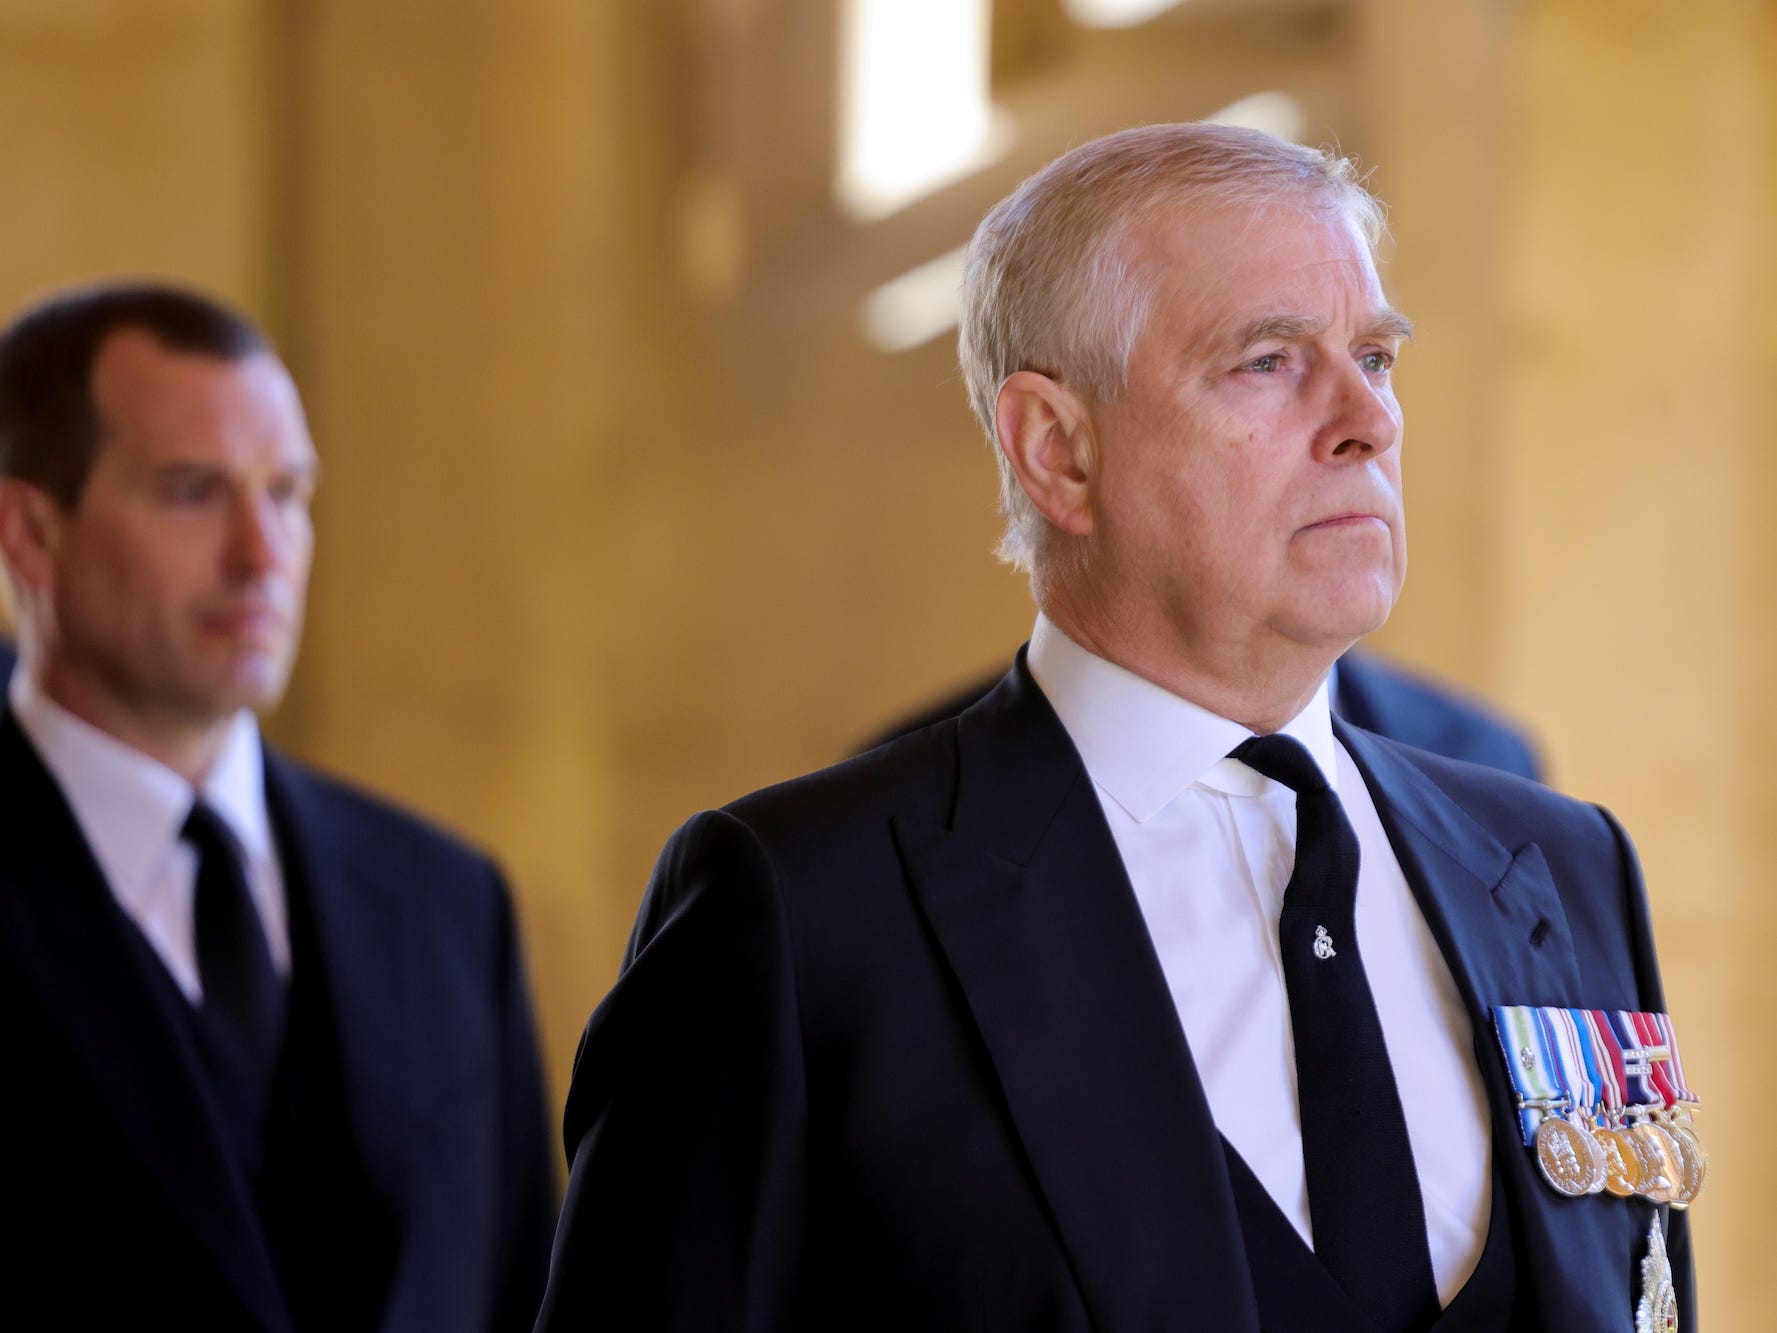 Prince Andrew wearing a dark suit and medals at Prince Philip's funeral in April 2021.